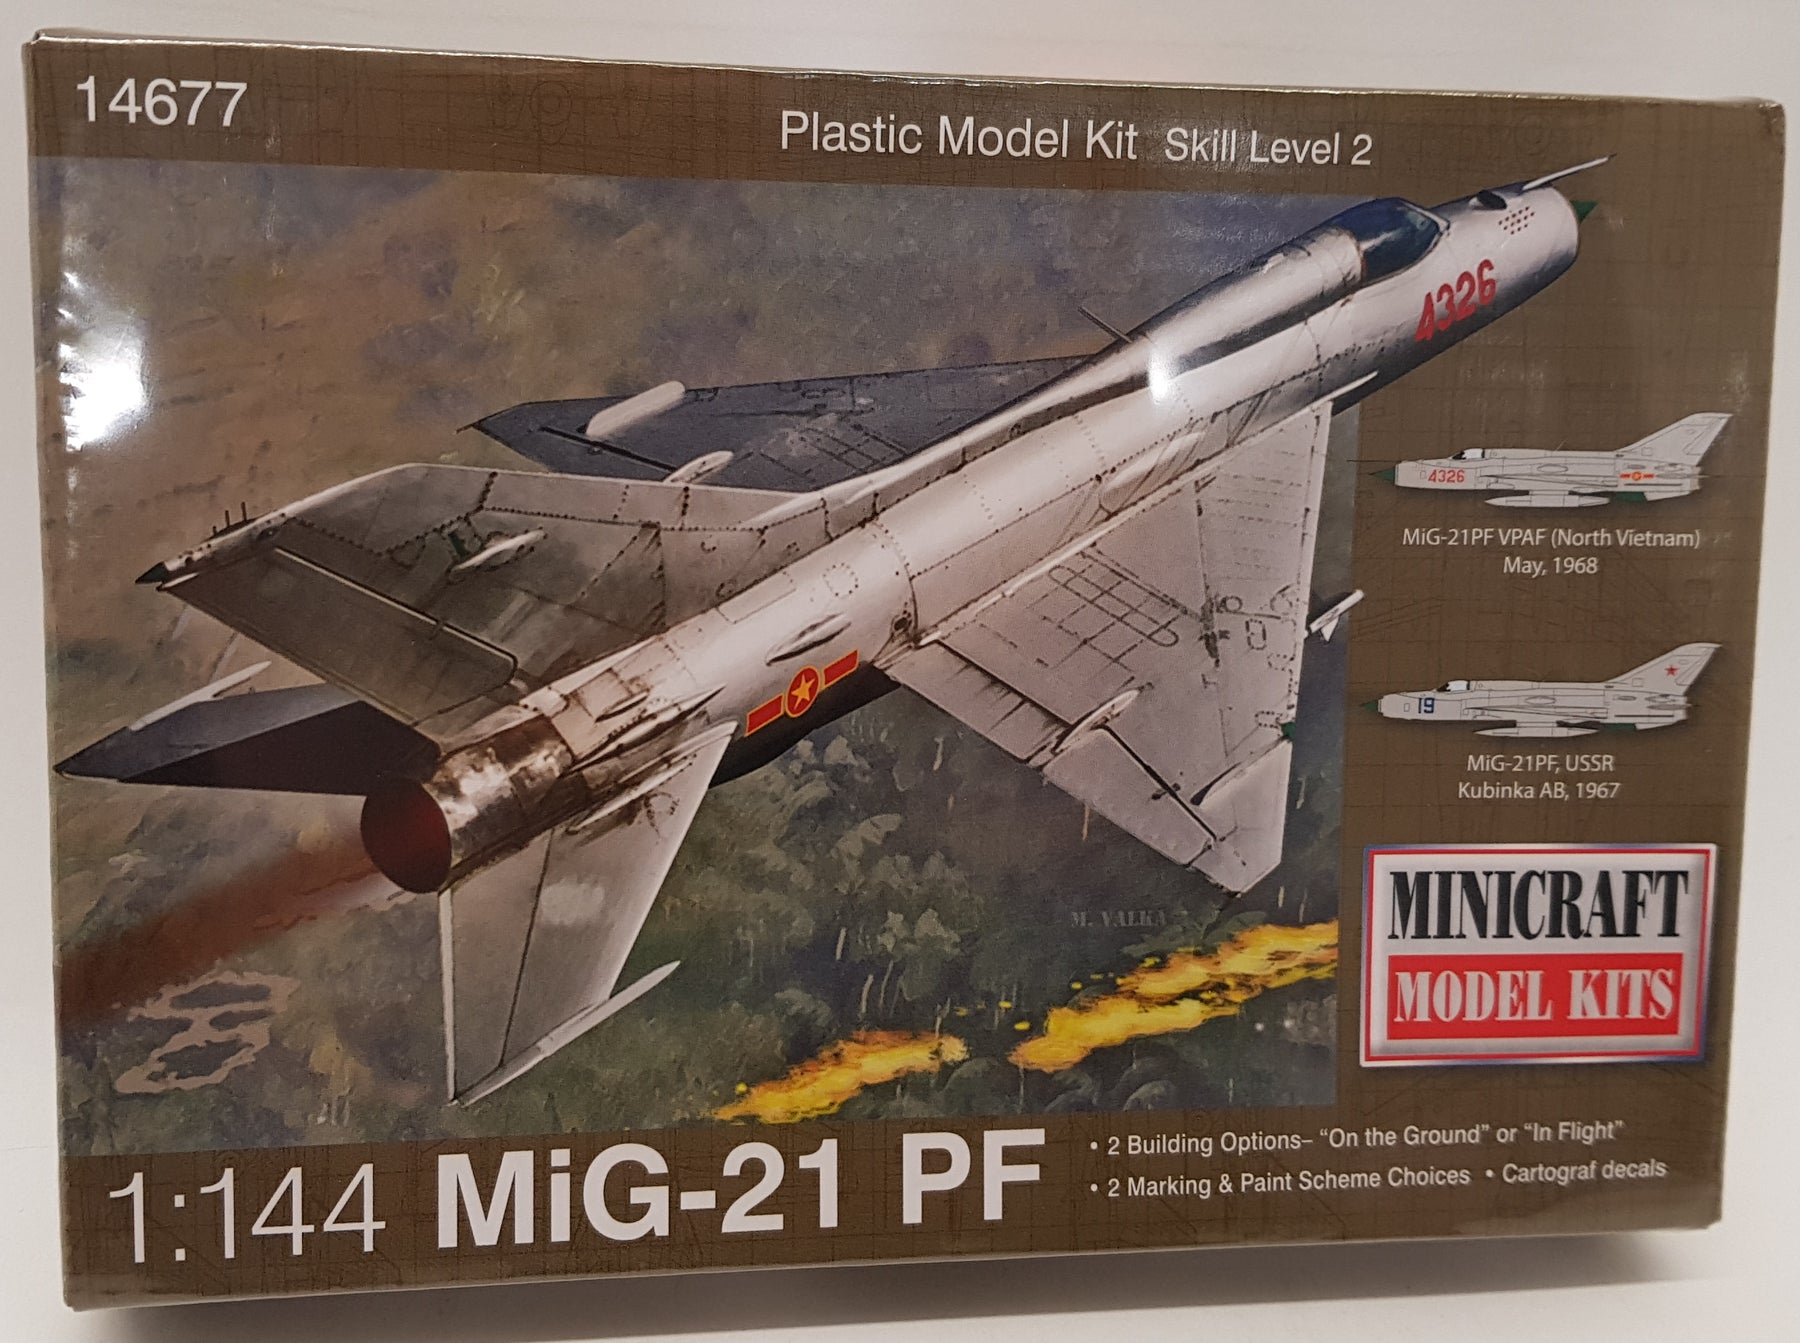 Minicraft Model Aircraft Kit 14677 - 1/144 Scale - MiG-21 PF